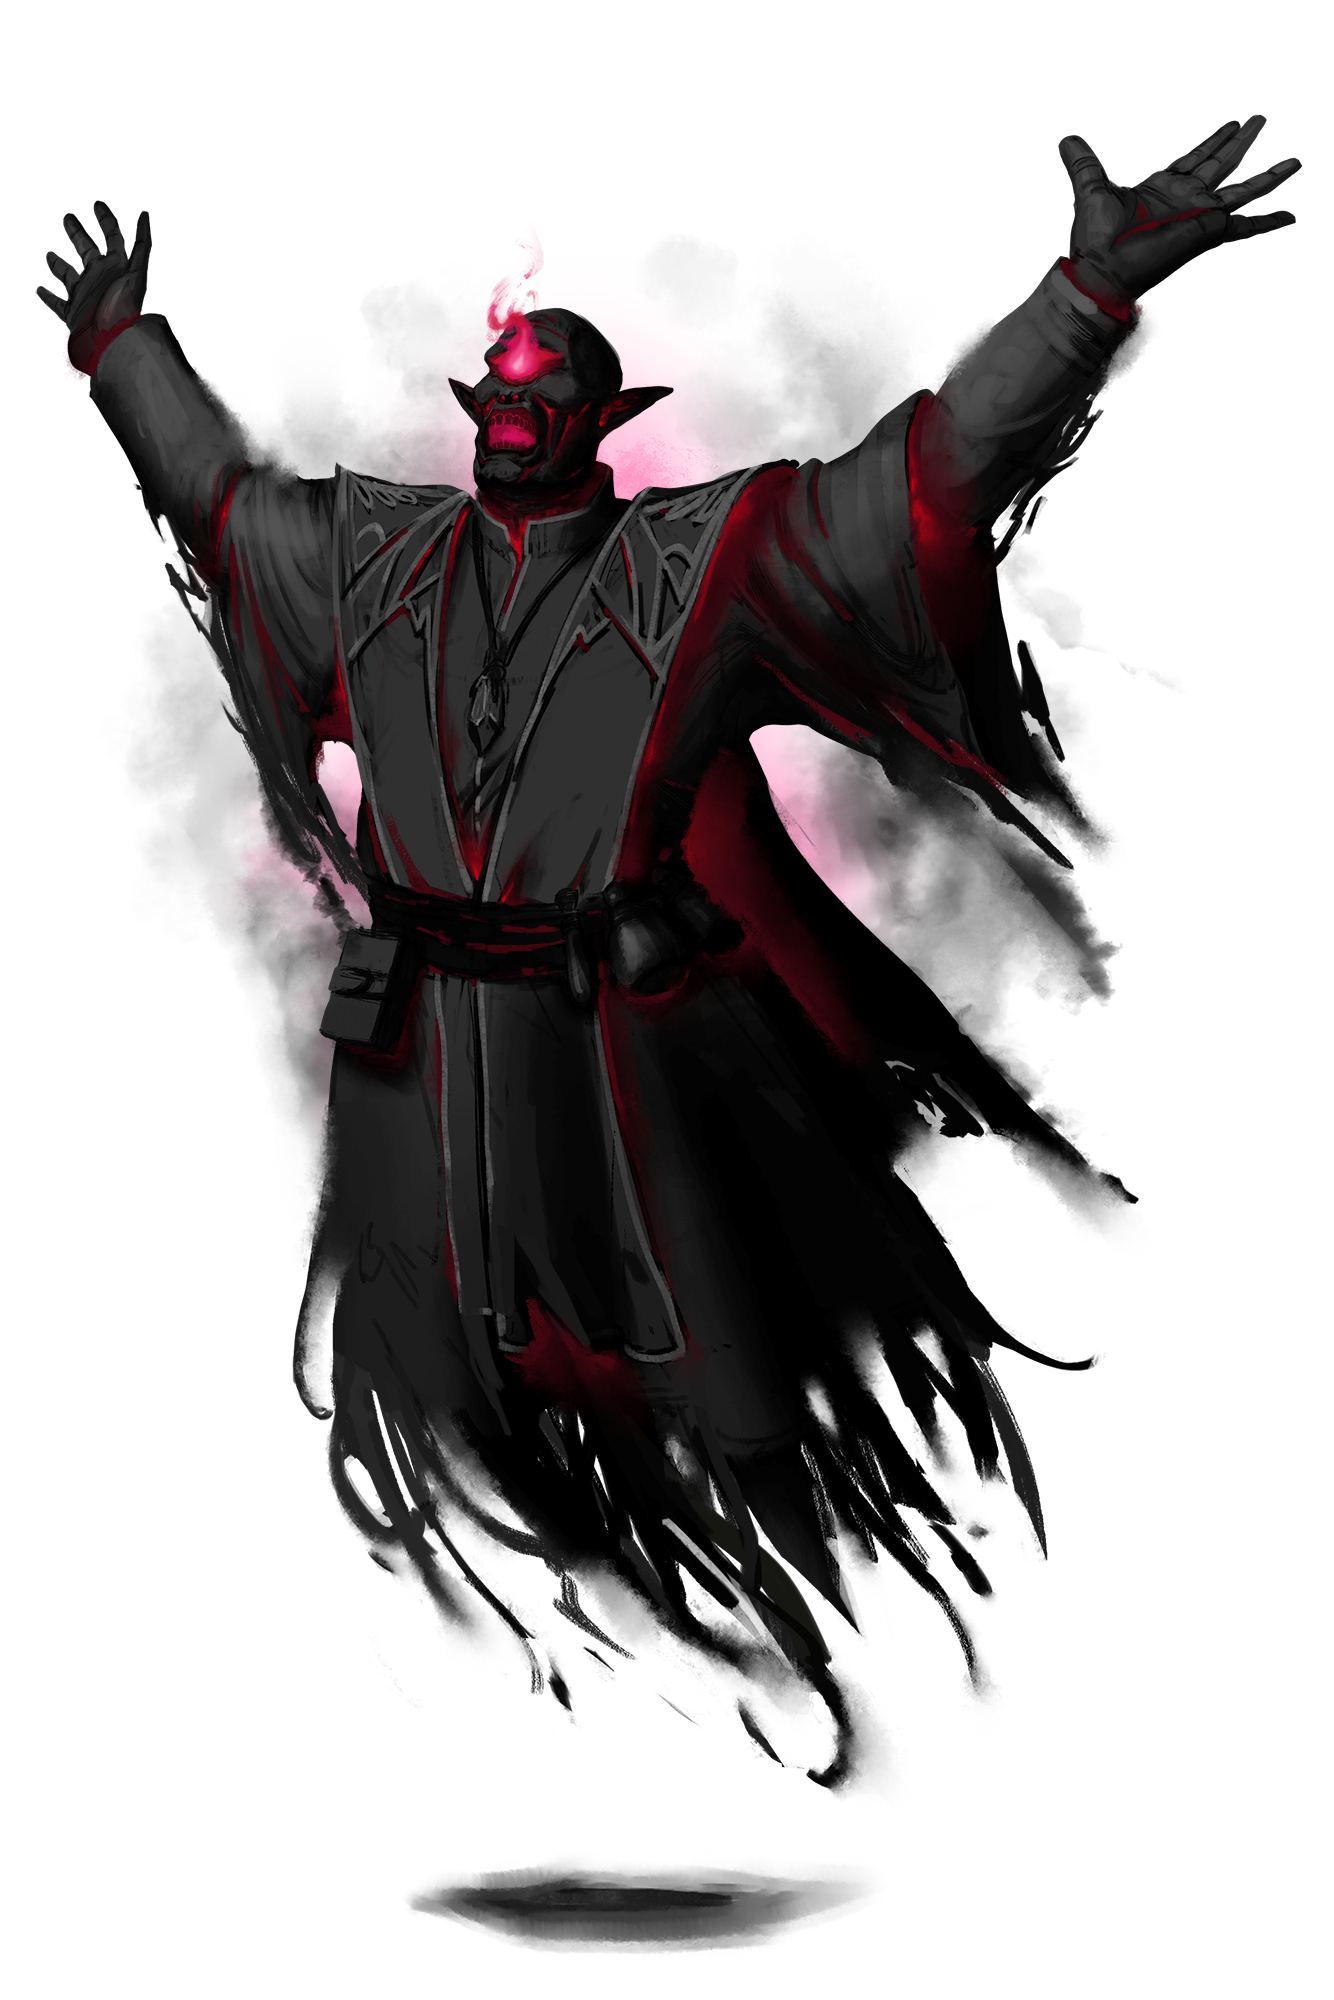 A dark skinned, malevolent spirit. They are wearing ragged robes that hang as they float off the ground with no visible feet, and one flaming red eye.